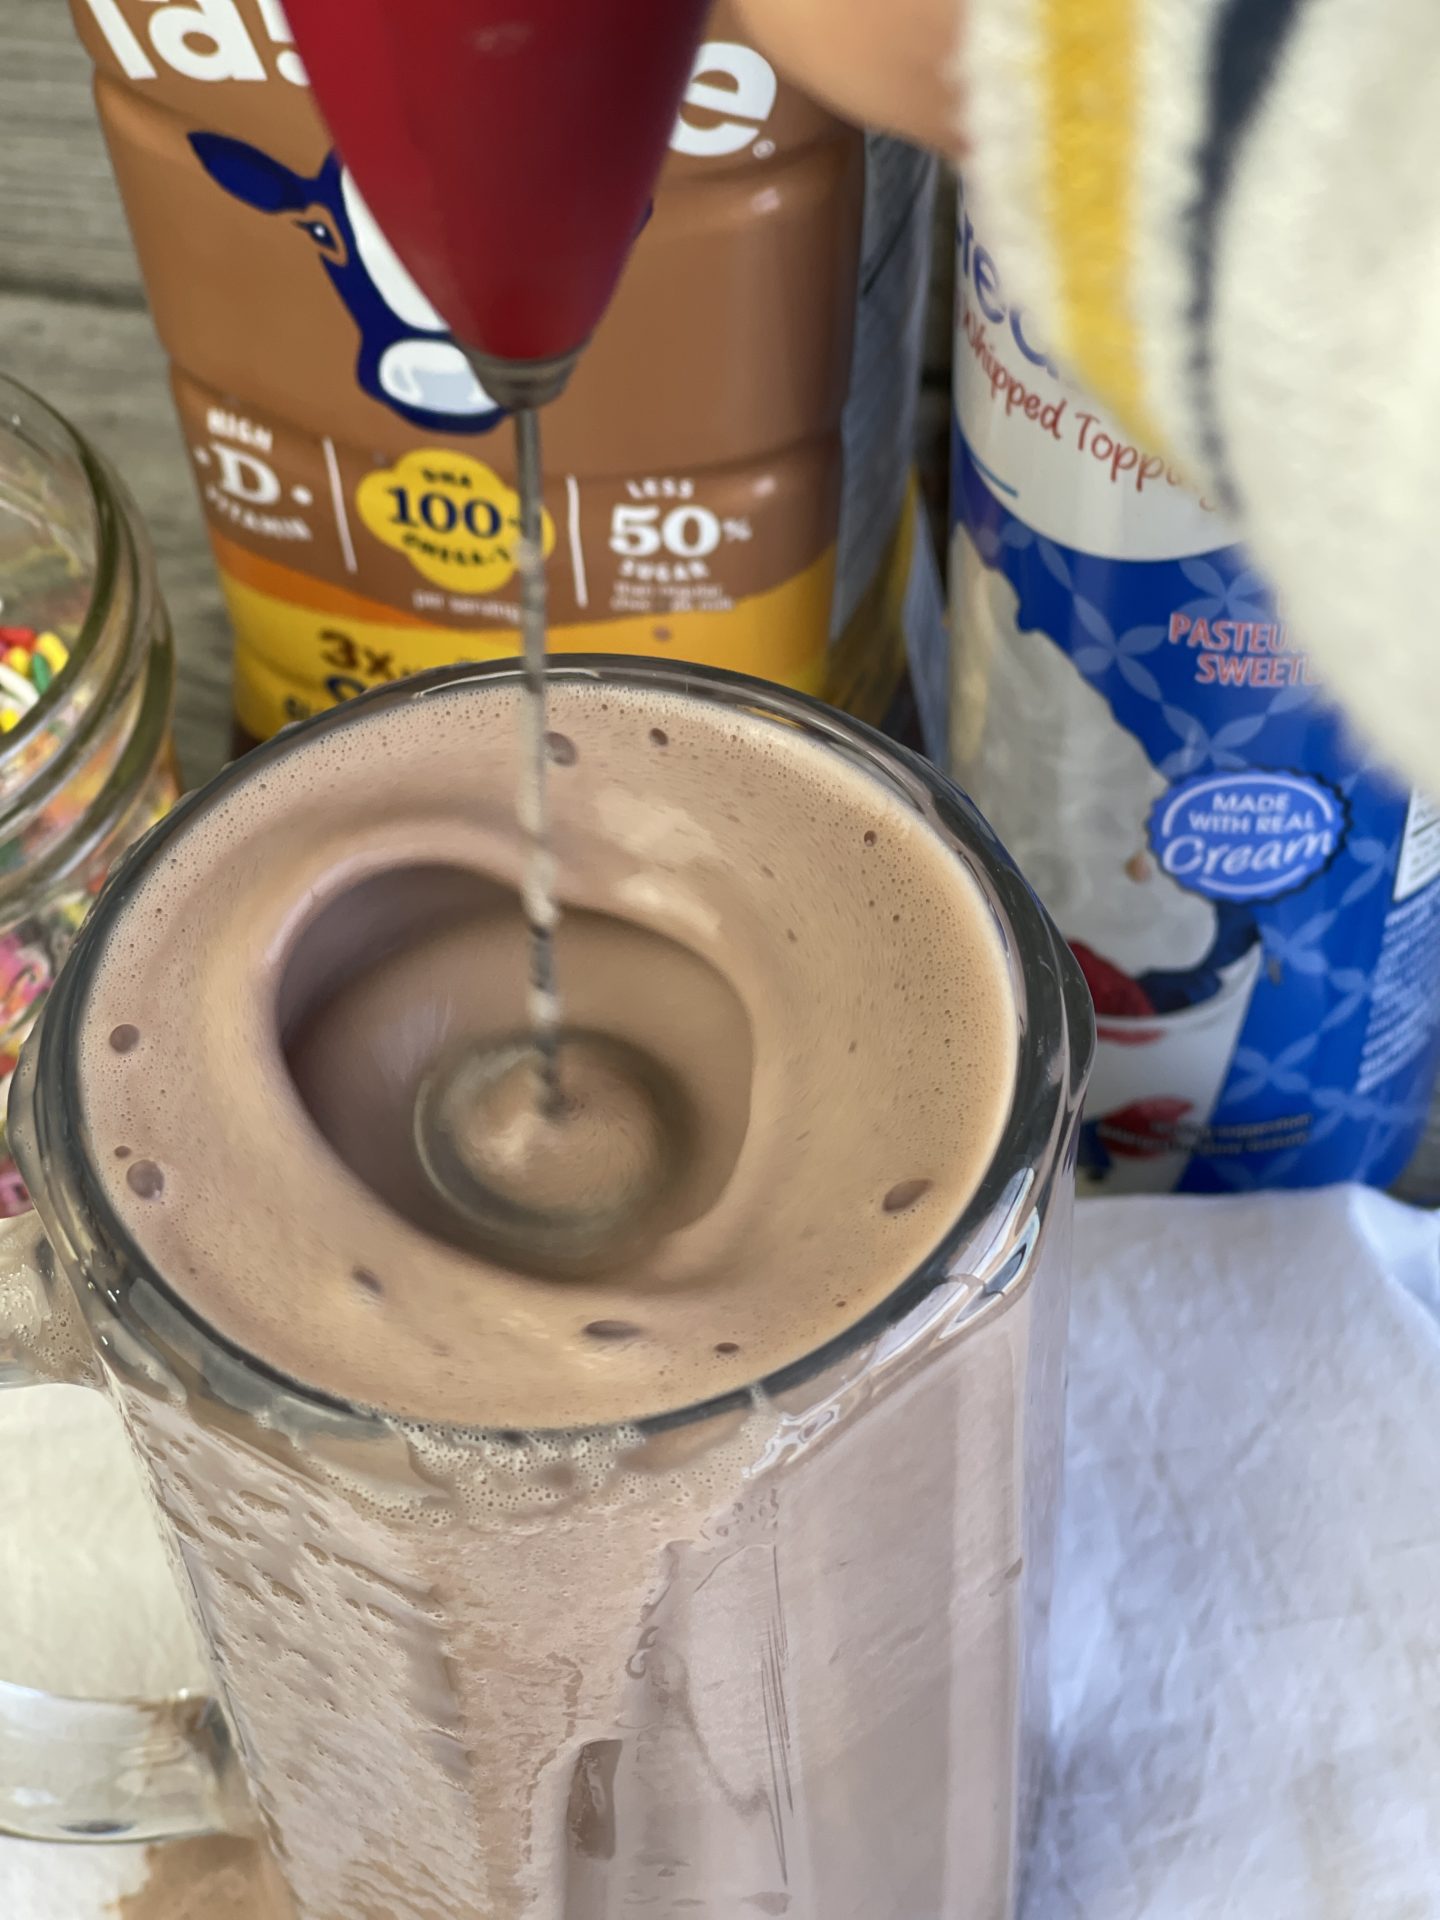 Cade's Perfect Chocolate Milk, Fairlife Chocolate Milk is frothed then topped with whipped cream and sprinkles. A sweet filling snack with a protein packed milk that is delicious and healthy. #milk #chocolate #fairlife